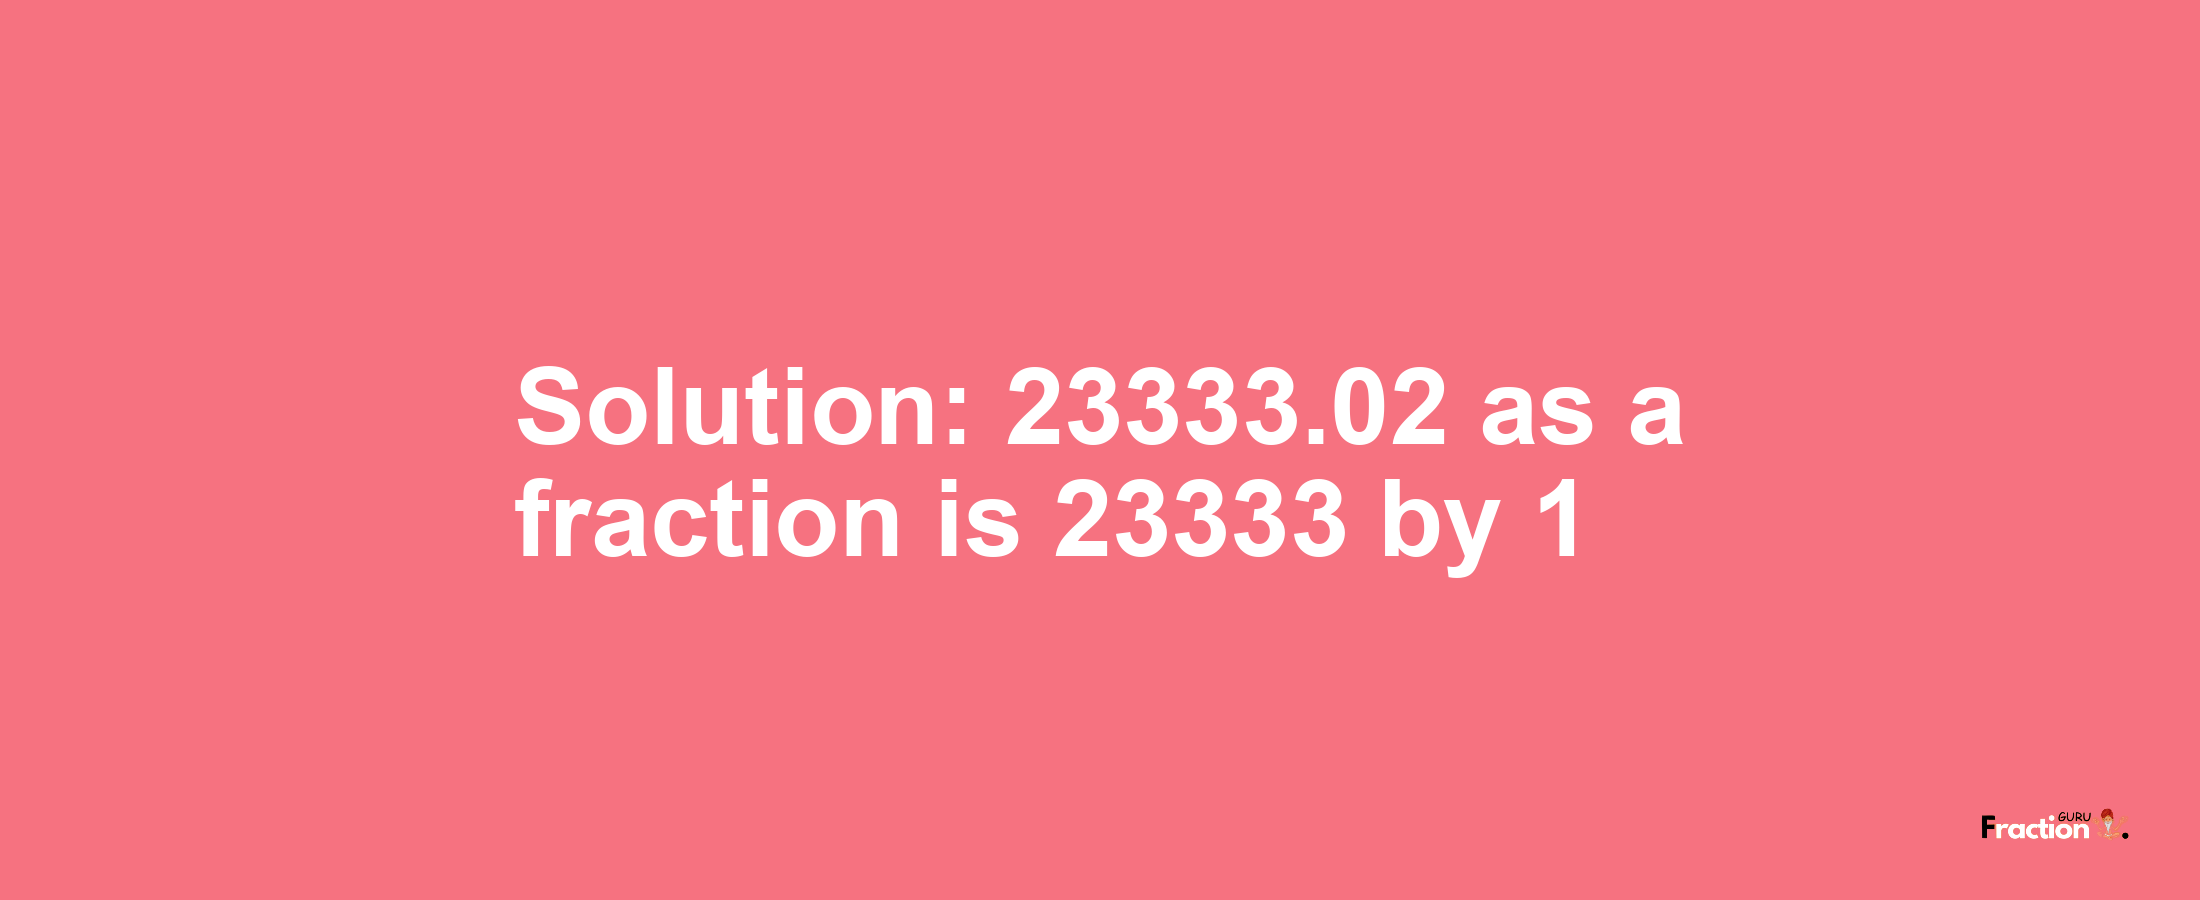 Solution:23333.02 as a fraction is 23333/1